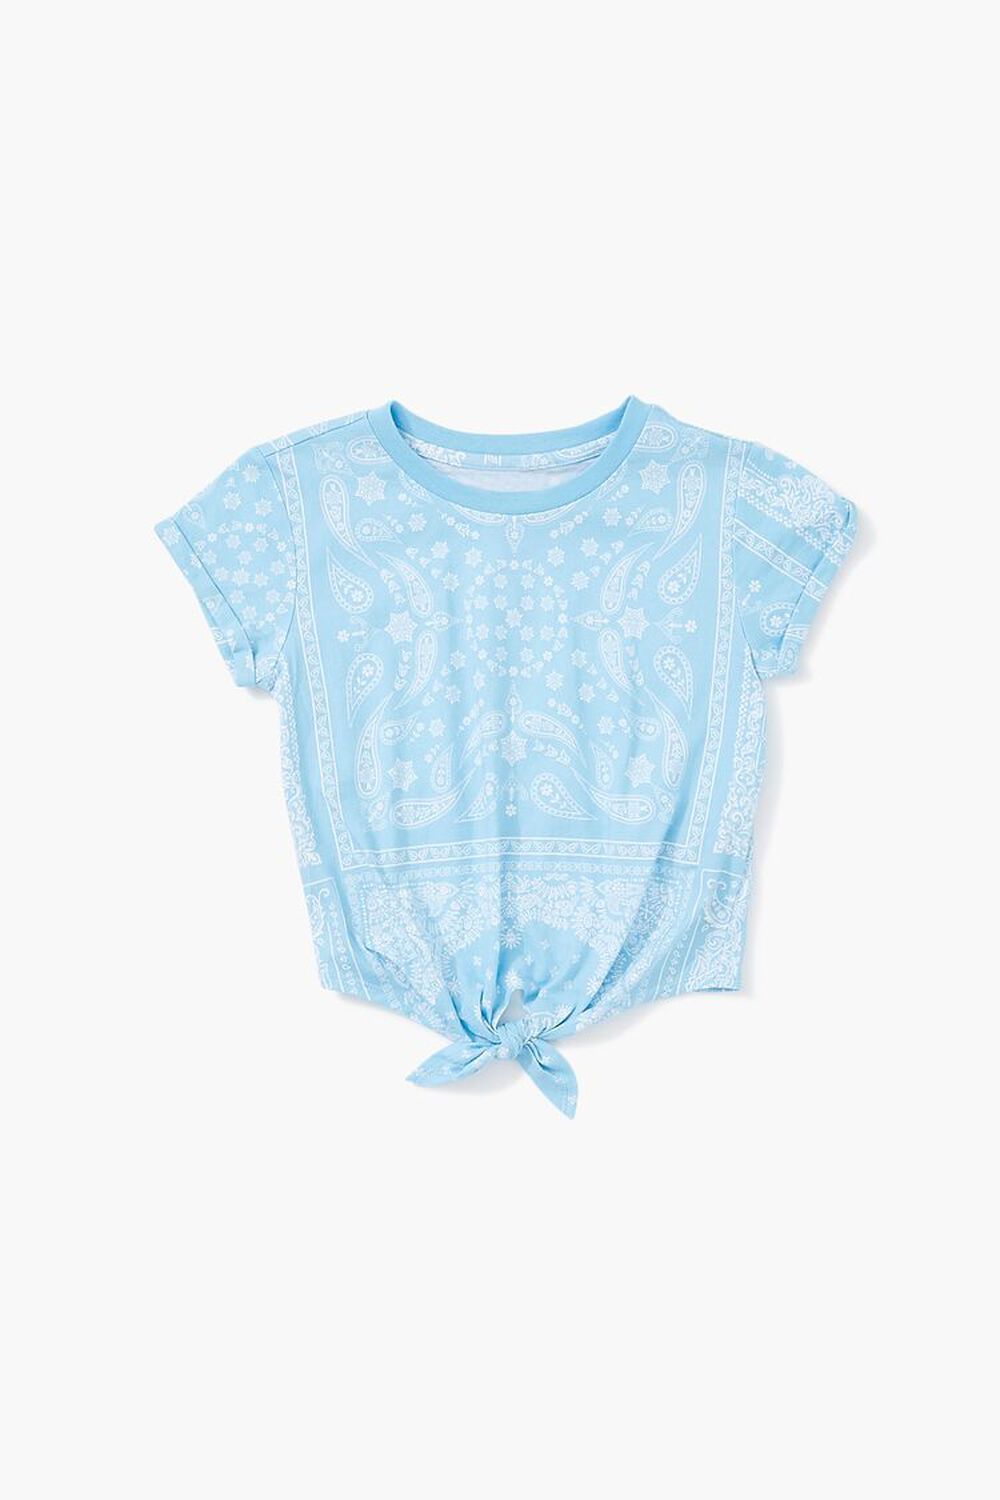 BLUE/WHITE Girls Paisley Knotted Tee (Kids), image 1